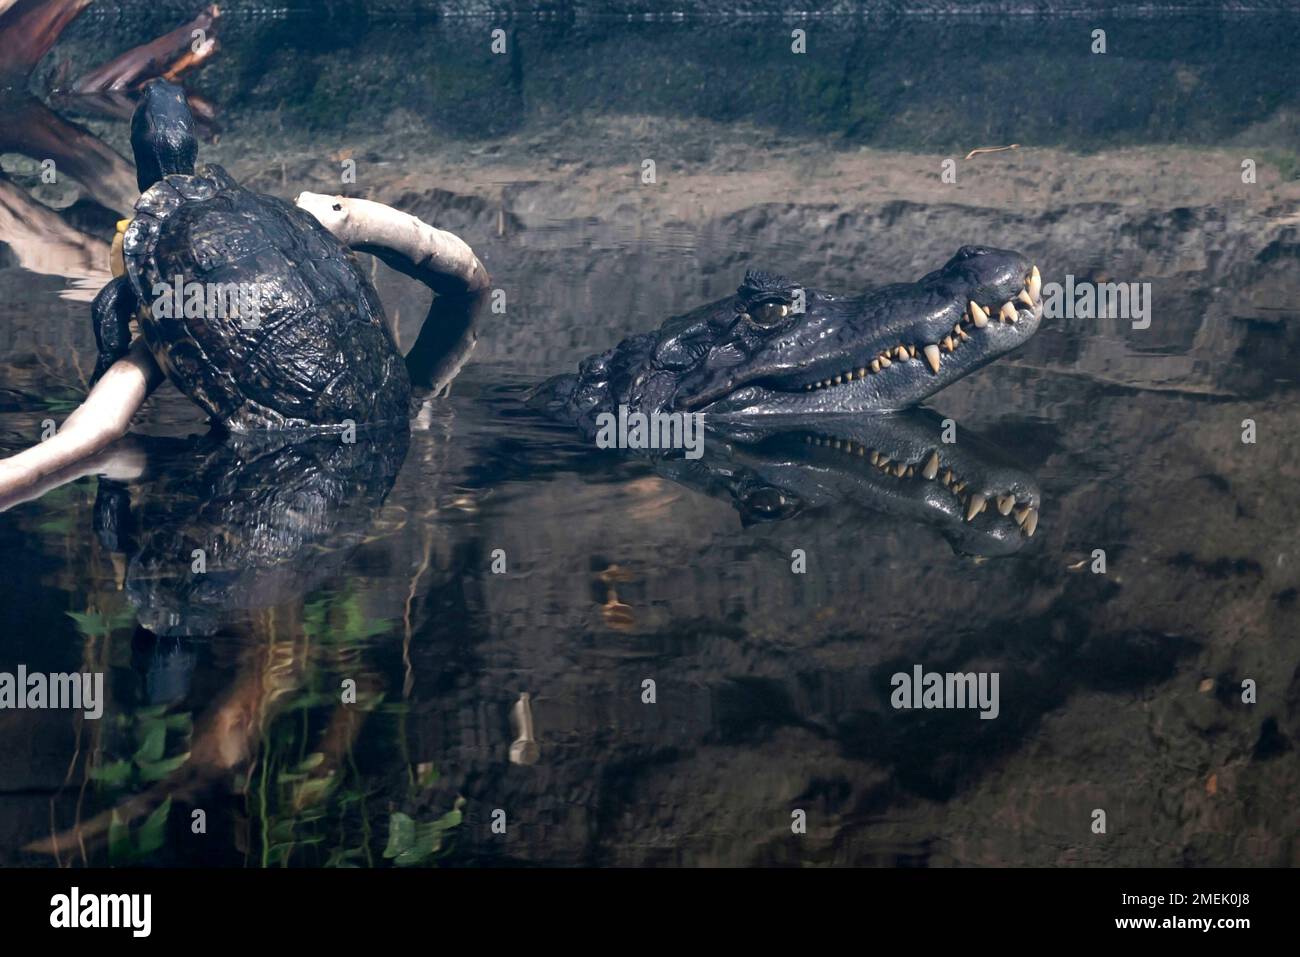 Crocodile and turtle together in the water of a zoo, The Netherlands. Stock Photo